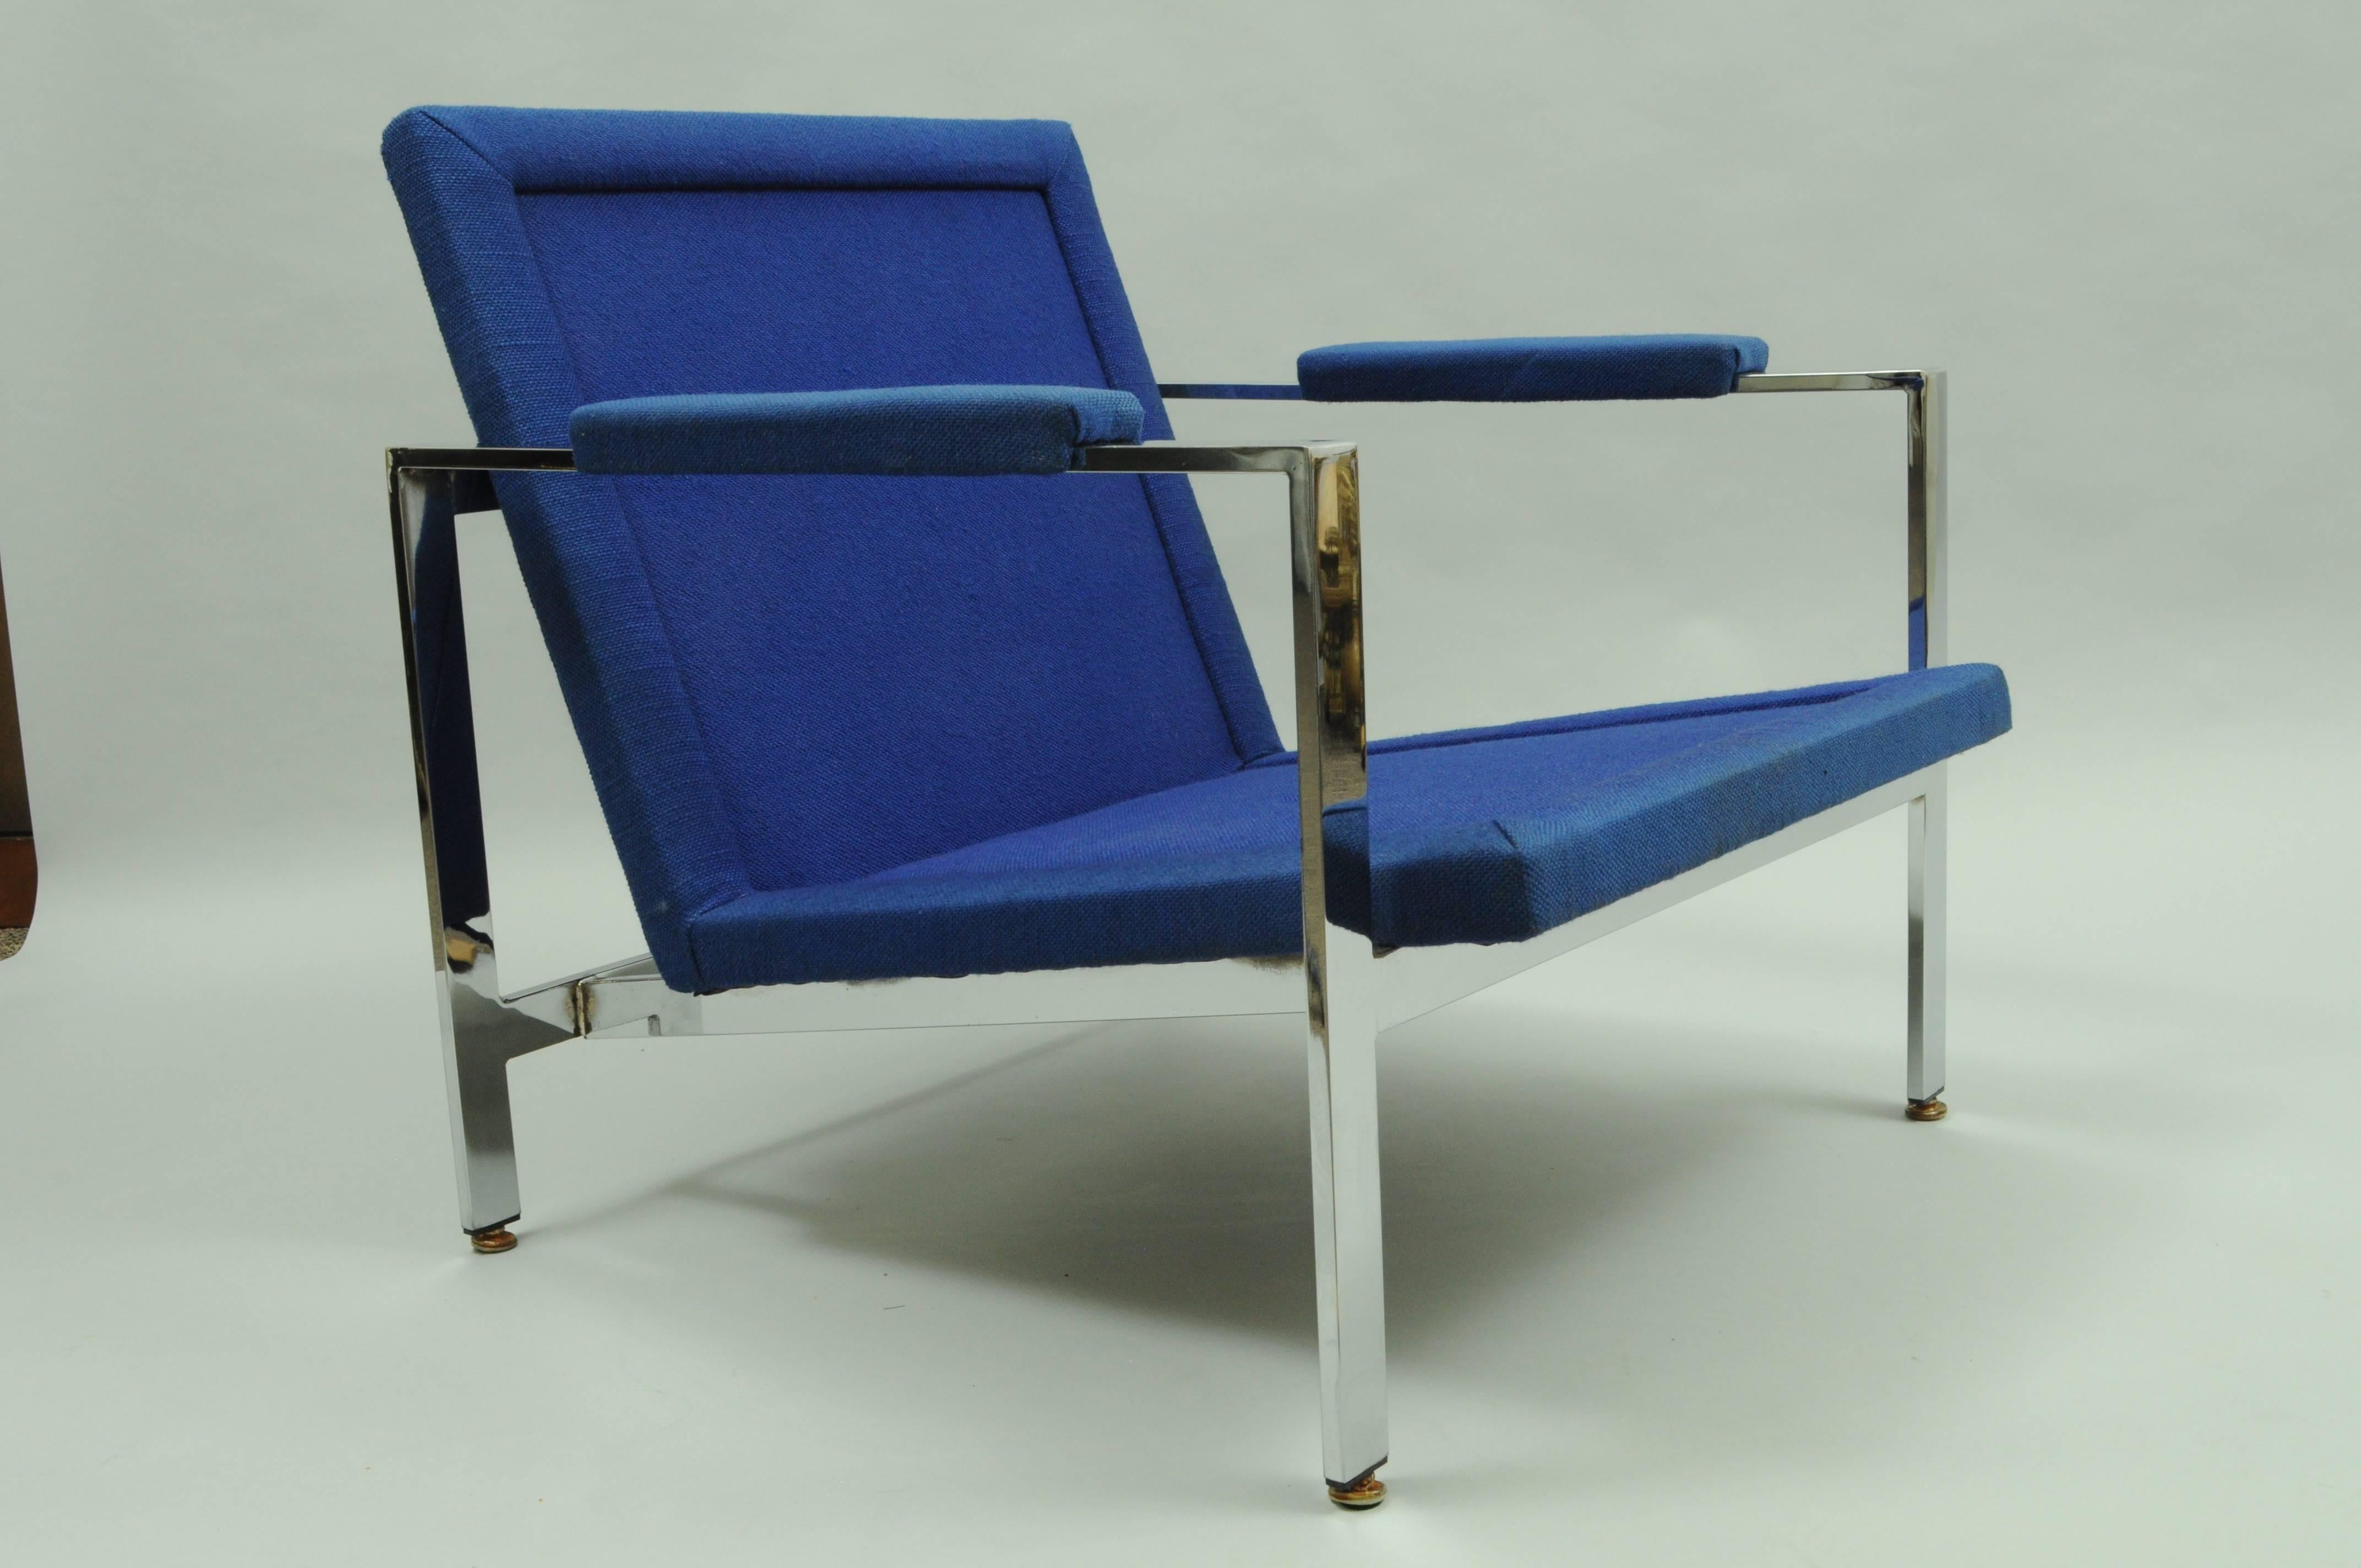 Striking vintage Mid-Century Modern flat bar chrome club chair attributed to Milo Baughman for Thayer Coggin. The chair features a sleek polished chrome frame with blue upholstered seat and armrests. Does not come with cushions.